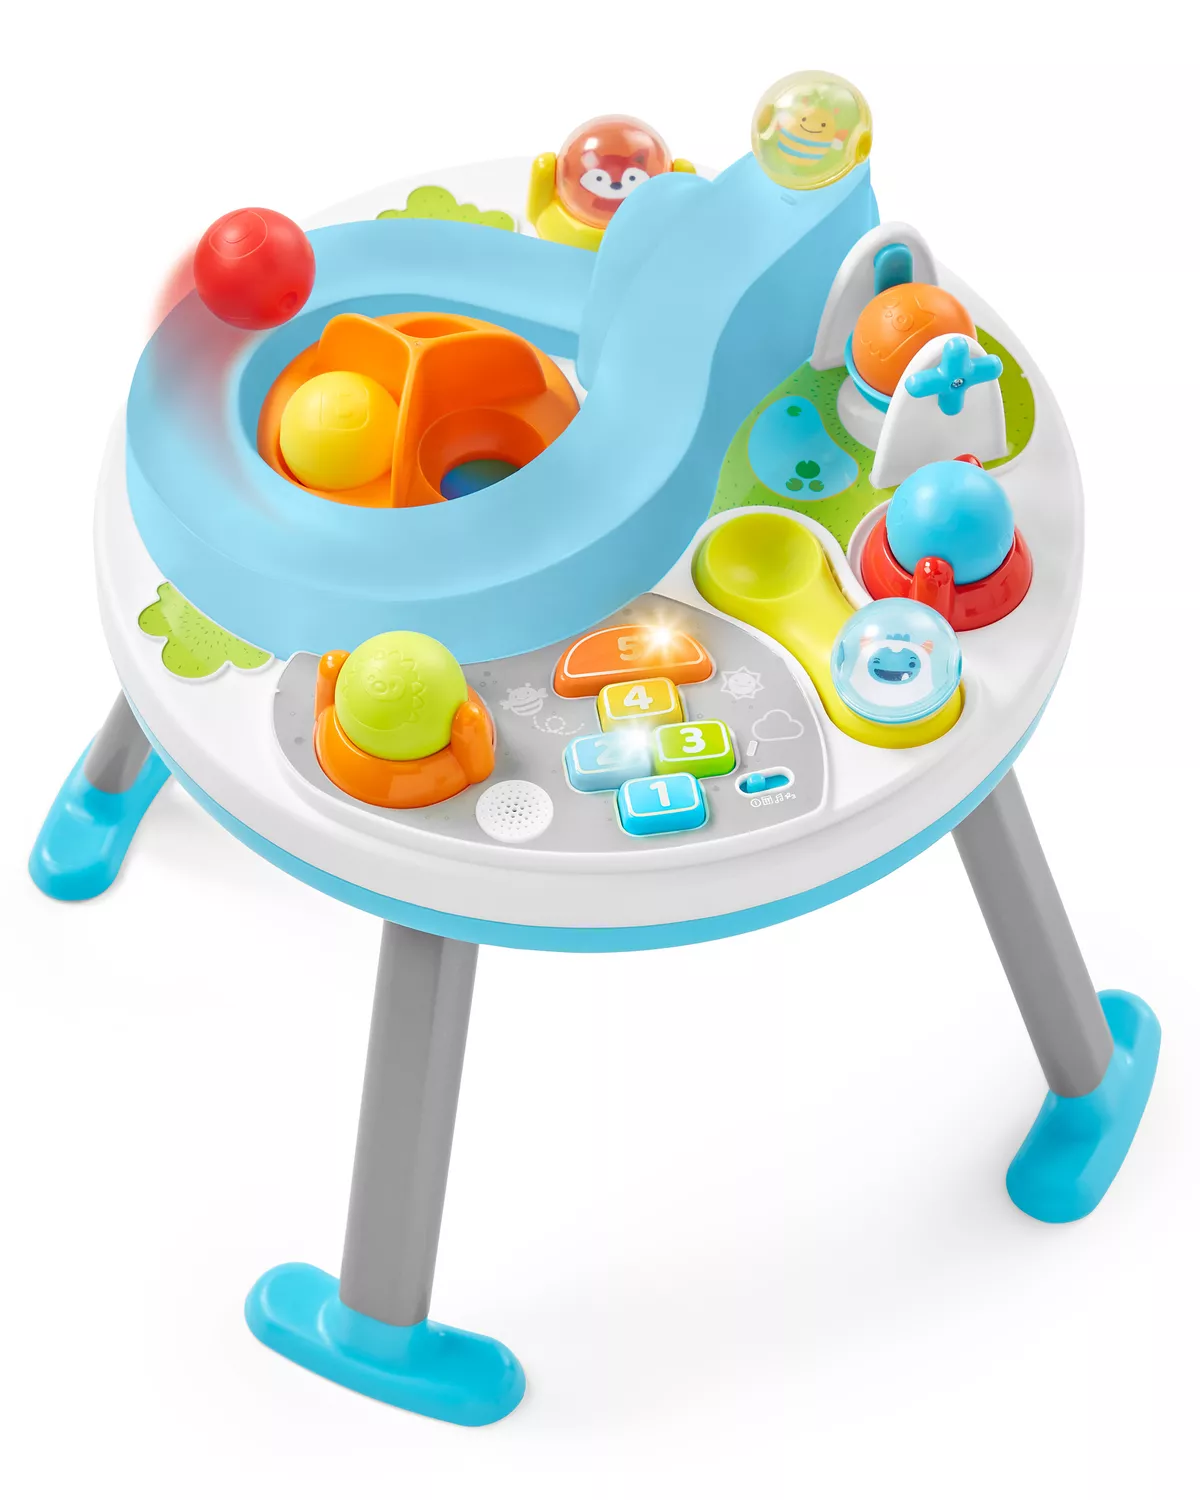 SkipHop Explore & More Let's Roll Activity Table